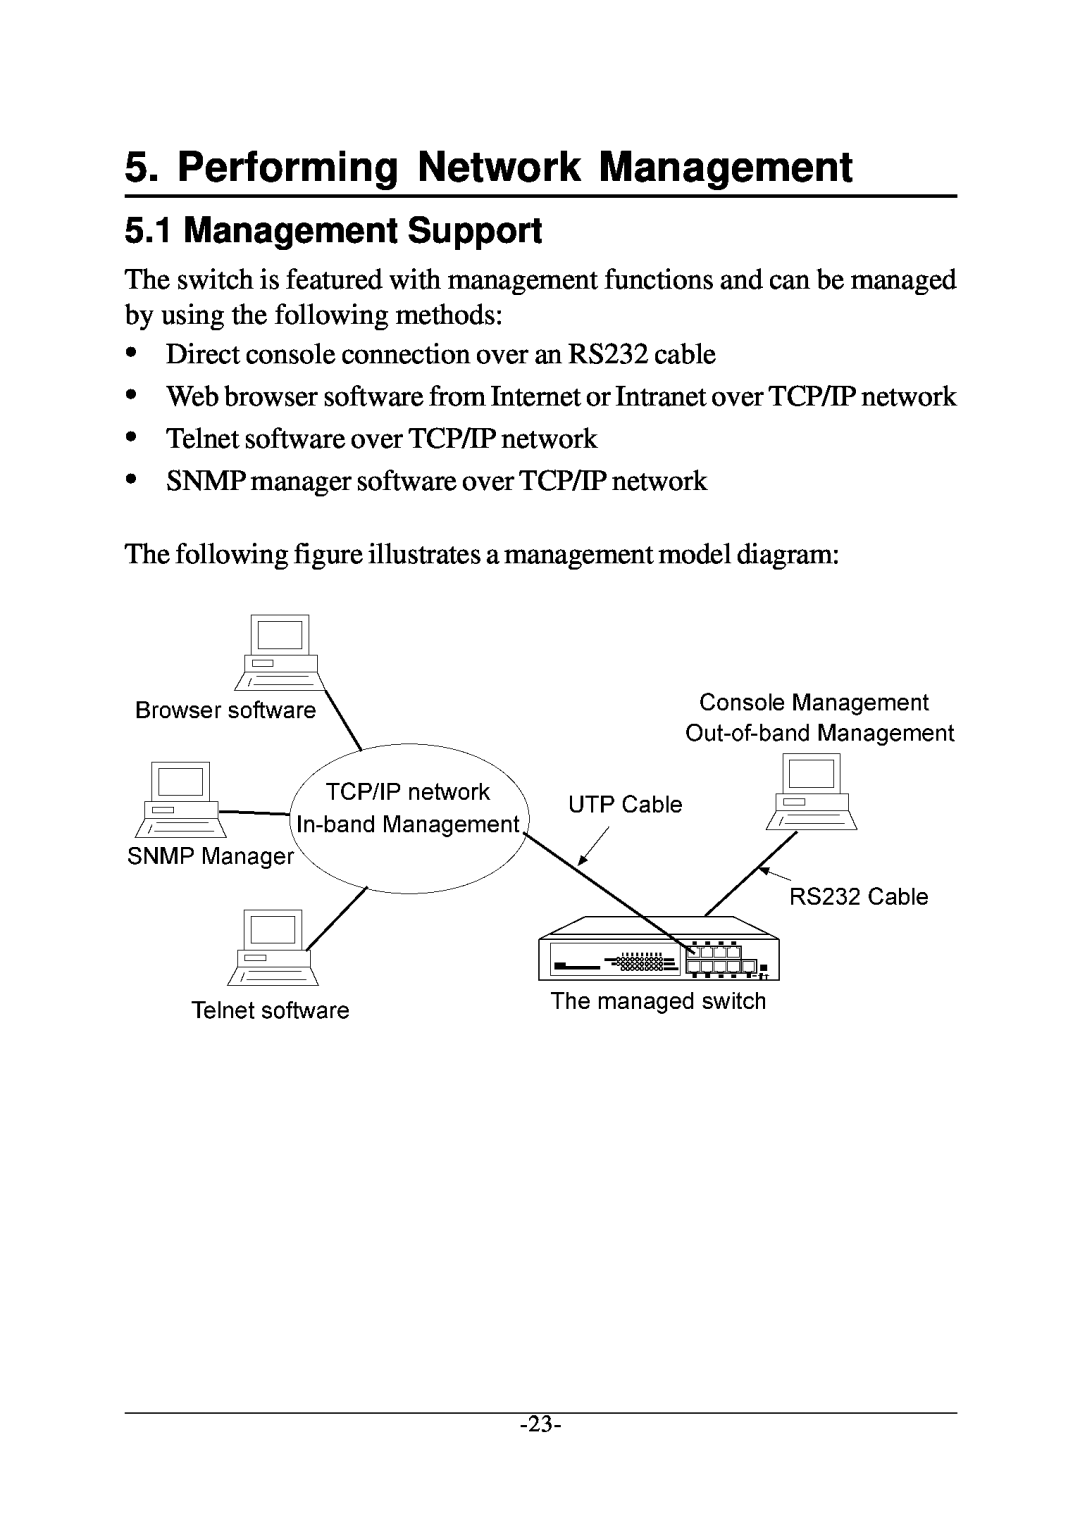 Xerox KS-801 operation manual Performing Network Management, Management Support 